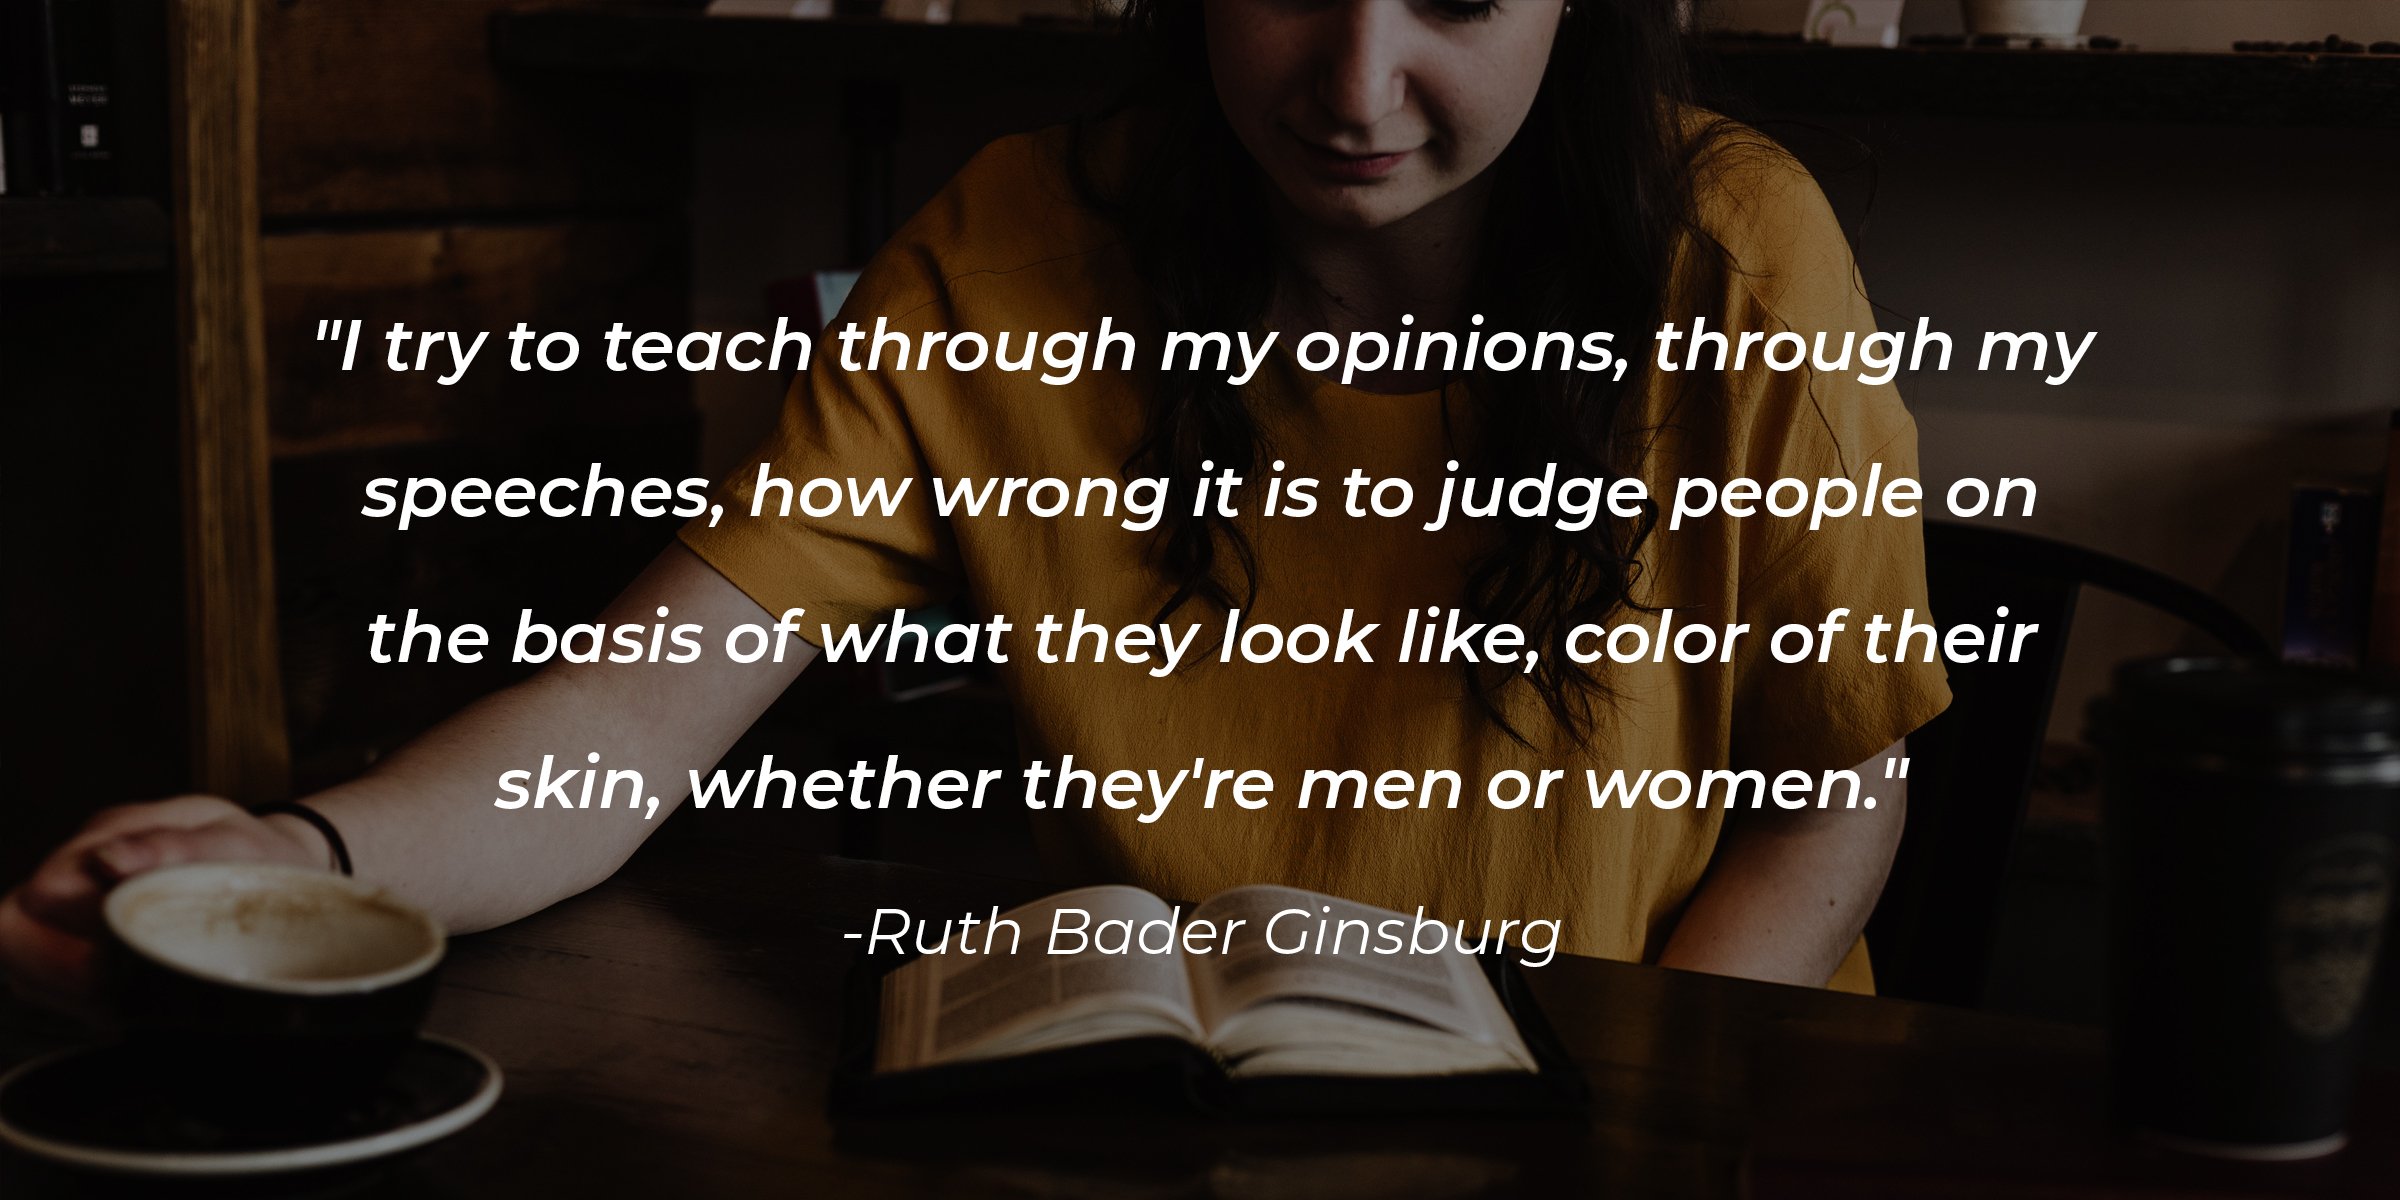 Unsplash |  A person reading combined with the quote: "I try to teach through my opinions, through my speeches, how wrong it is to judge people on the basis of what they look like, color of their skin, whether they're men or women." 